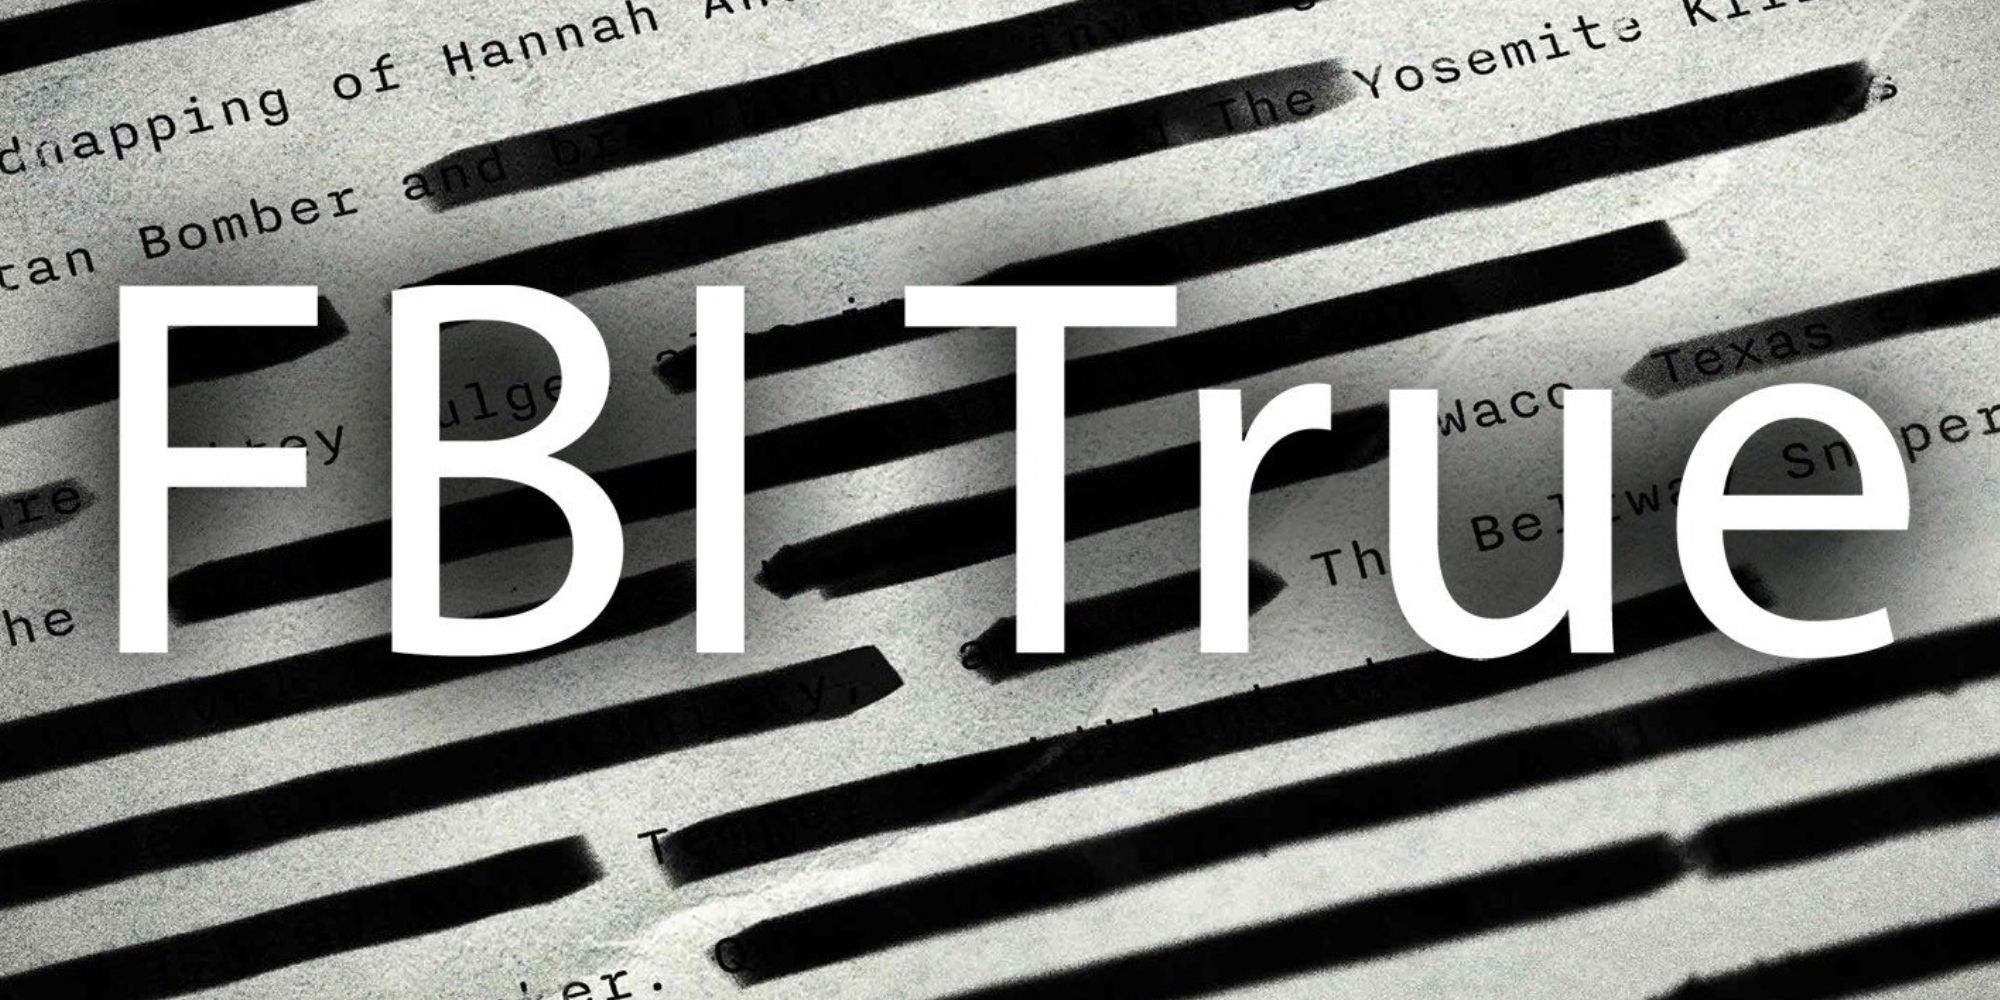 The FBI True title card features a redacted document behind the white lettering of the title